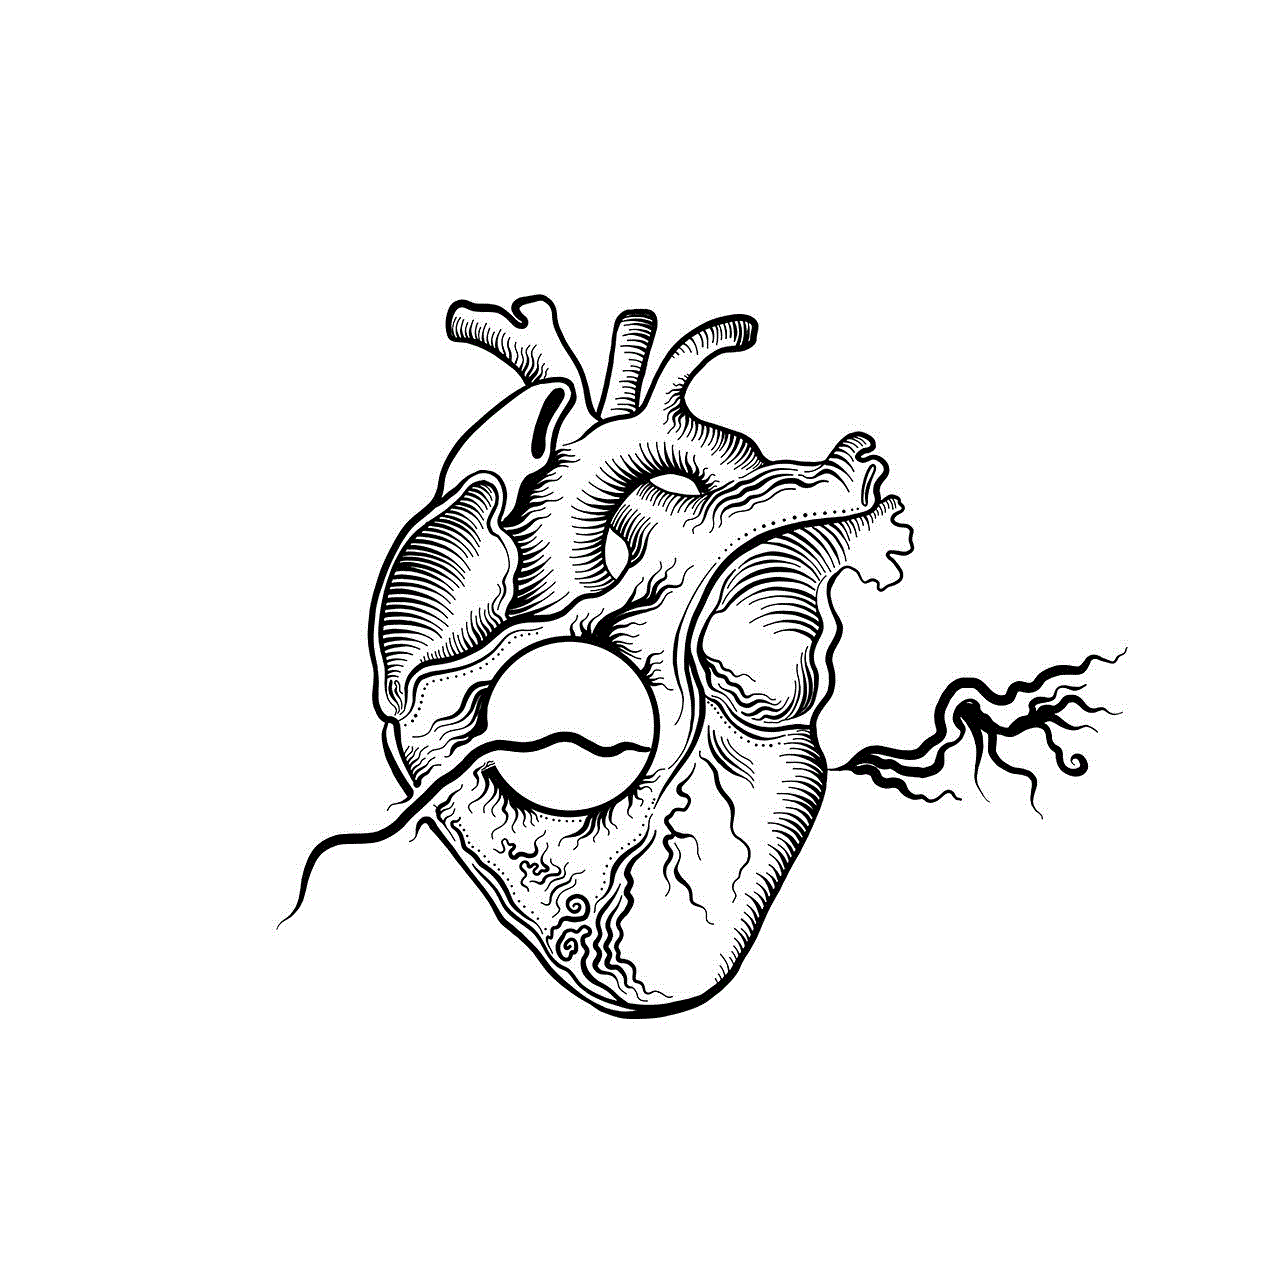 Heart Drawing